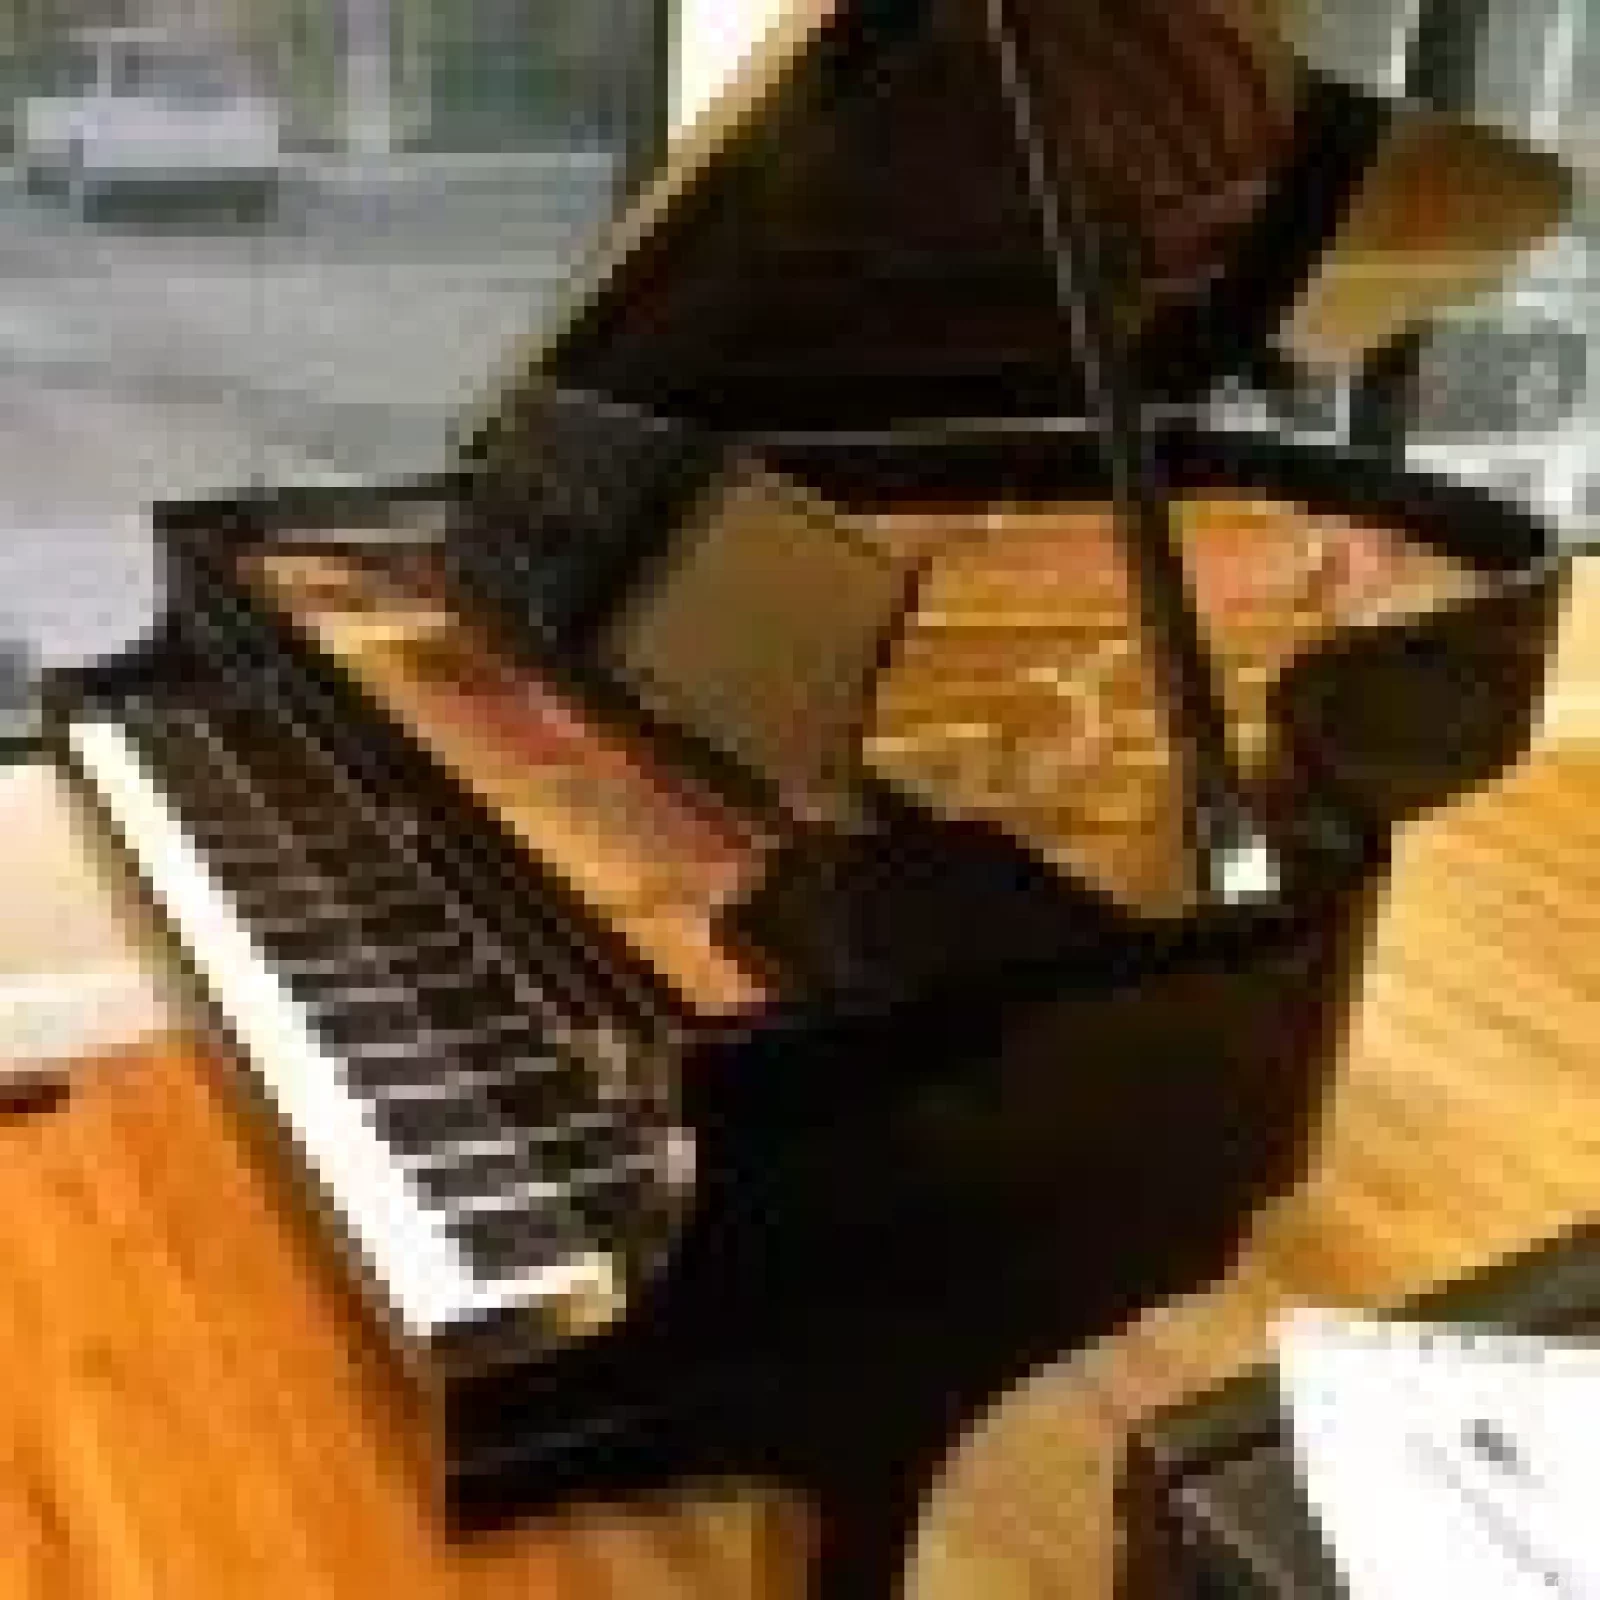 Occasion, Steinway & Sons, B-211